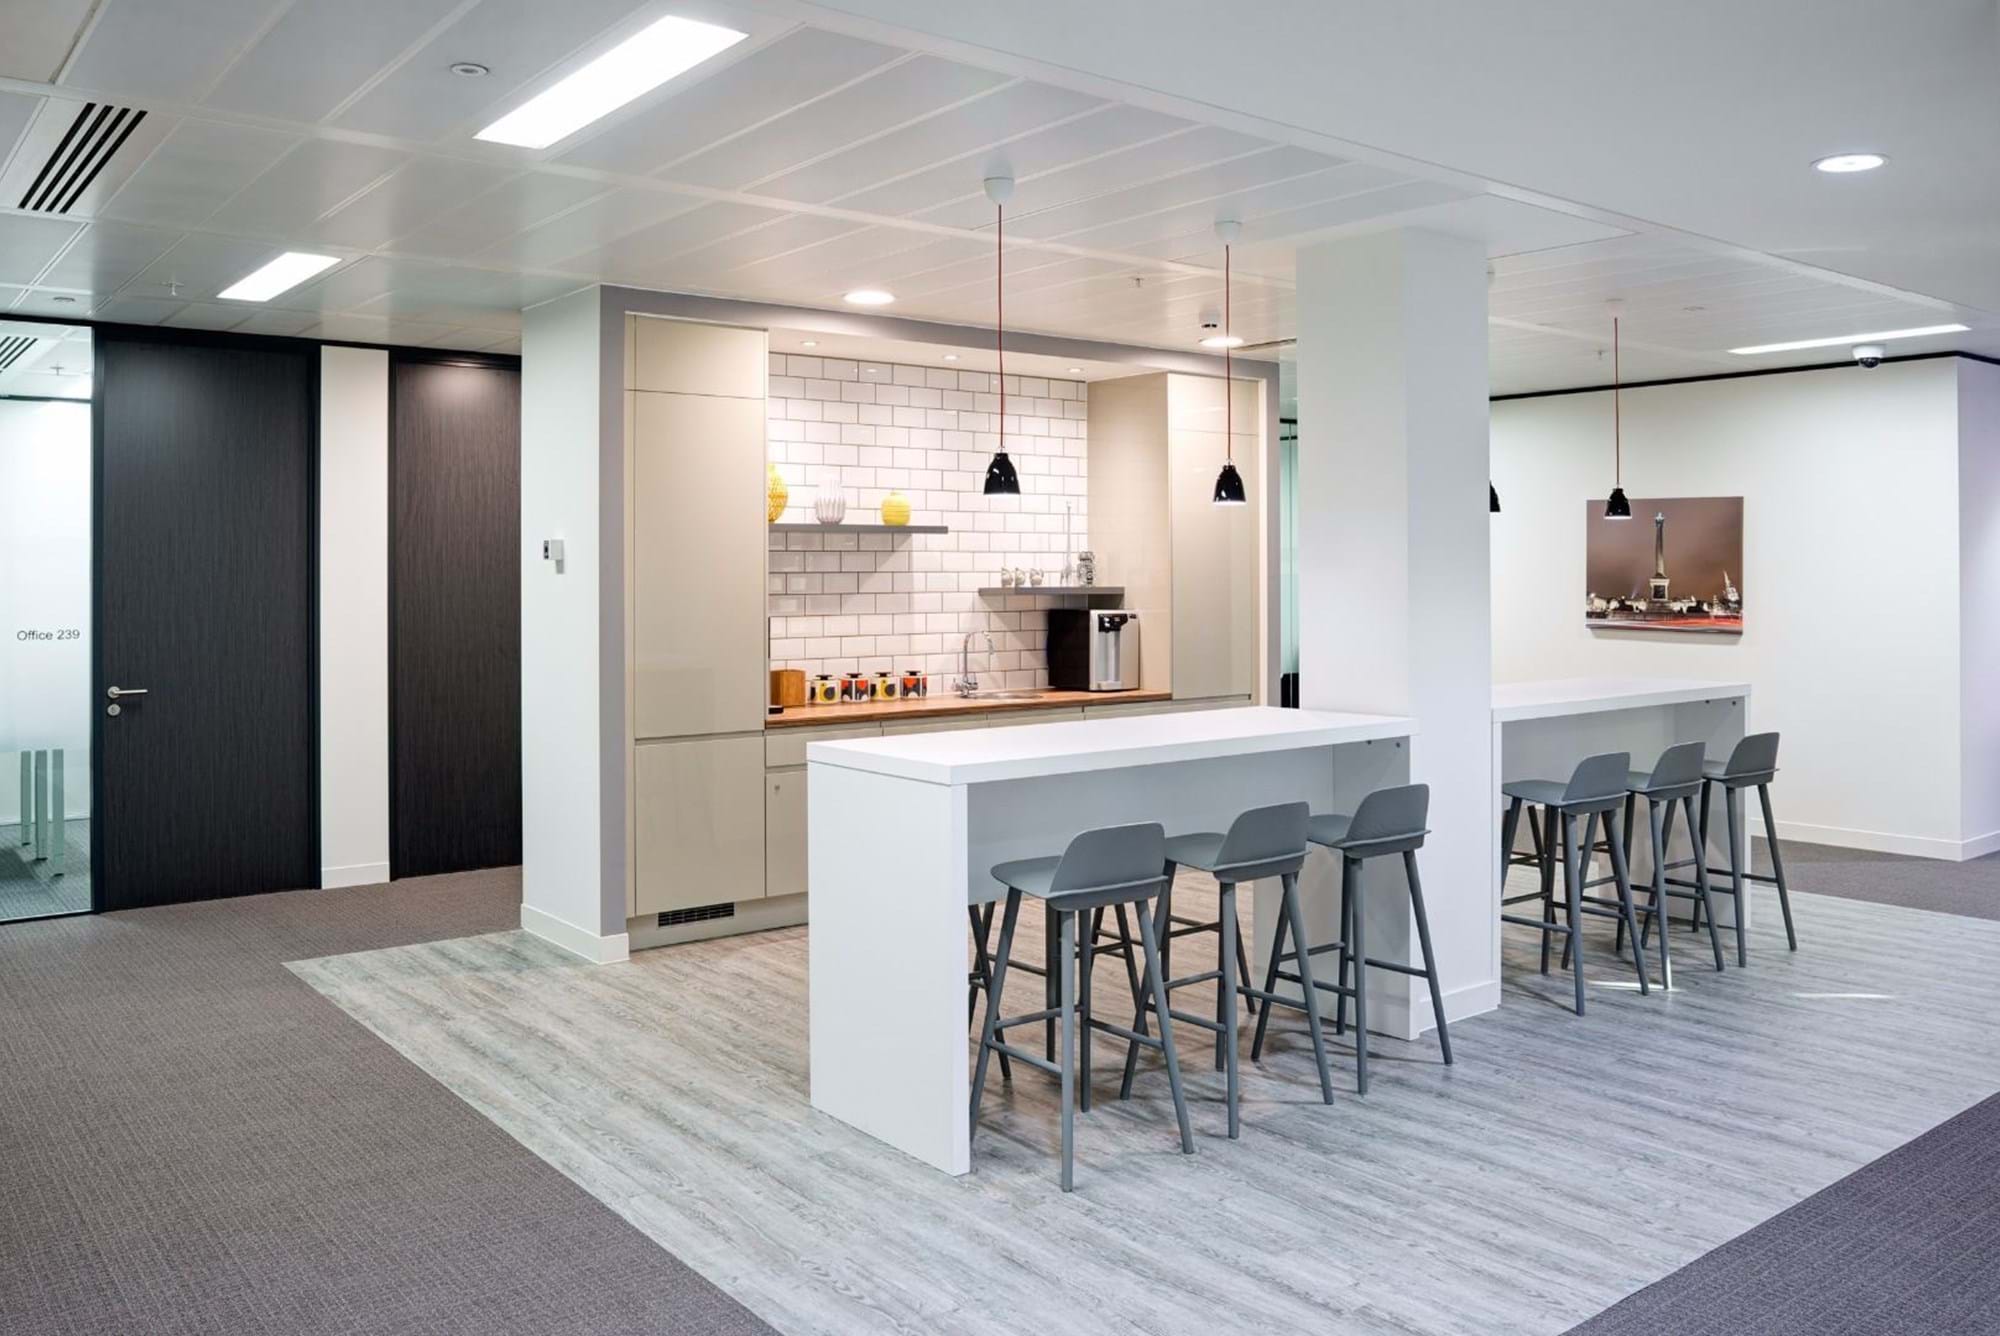 Modus Workspace office design, fit out and refurbishment - Regus St Marys Axe - Regus SMA 13 highres sRGB.jpg